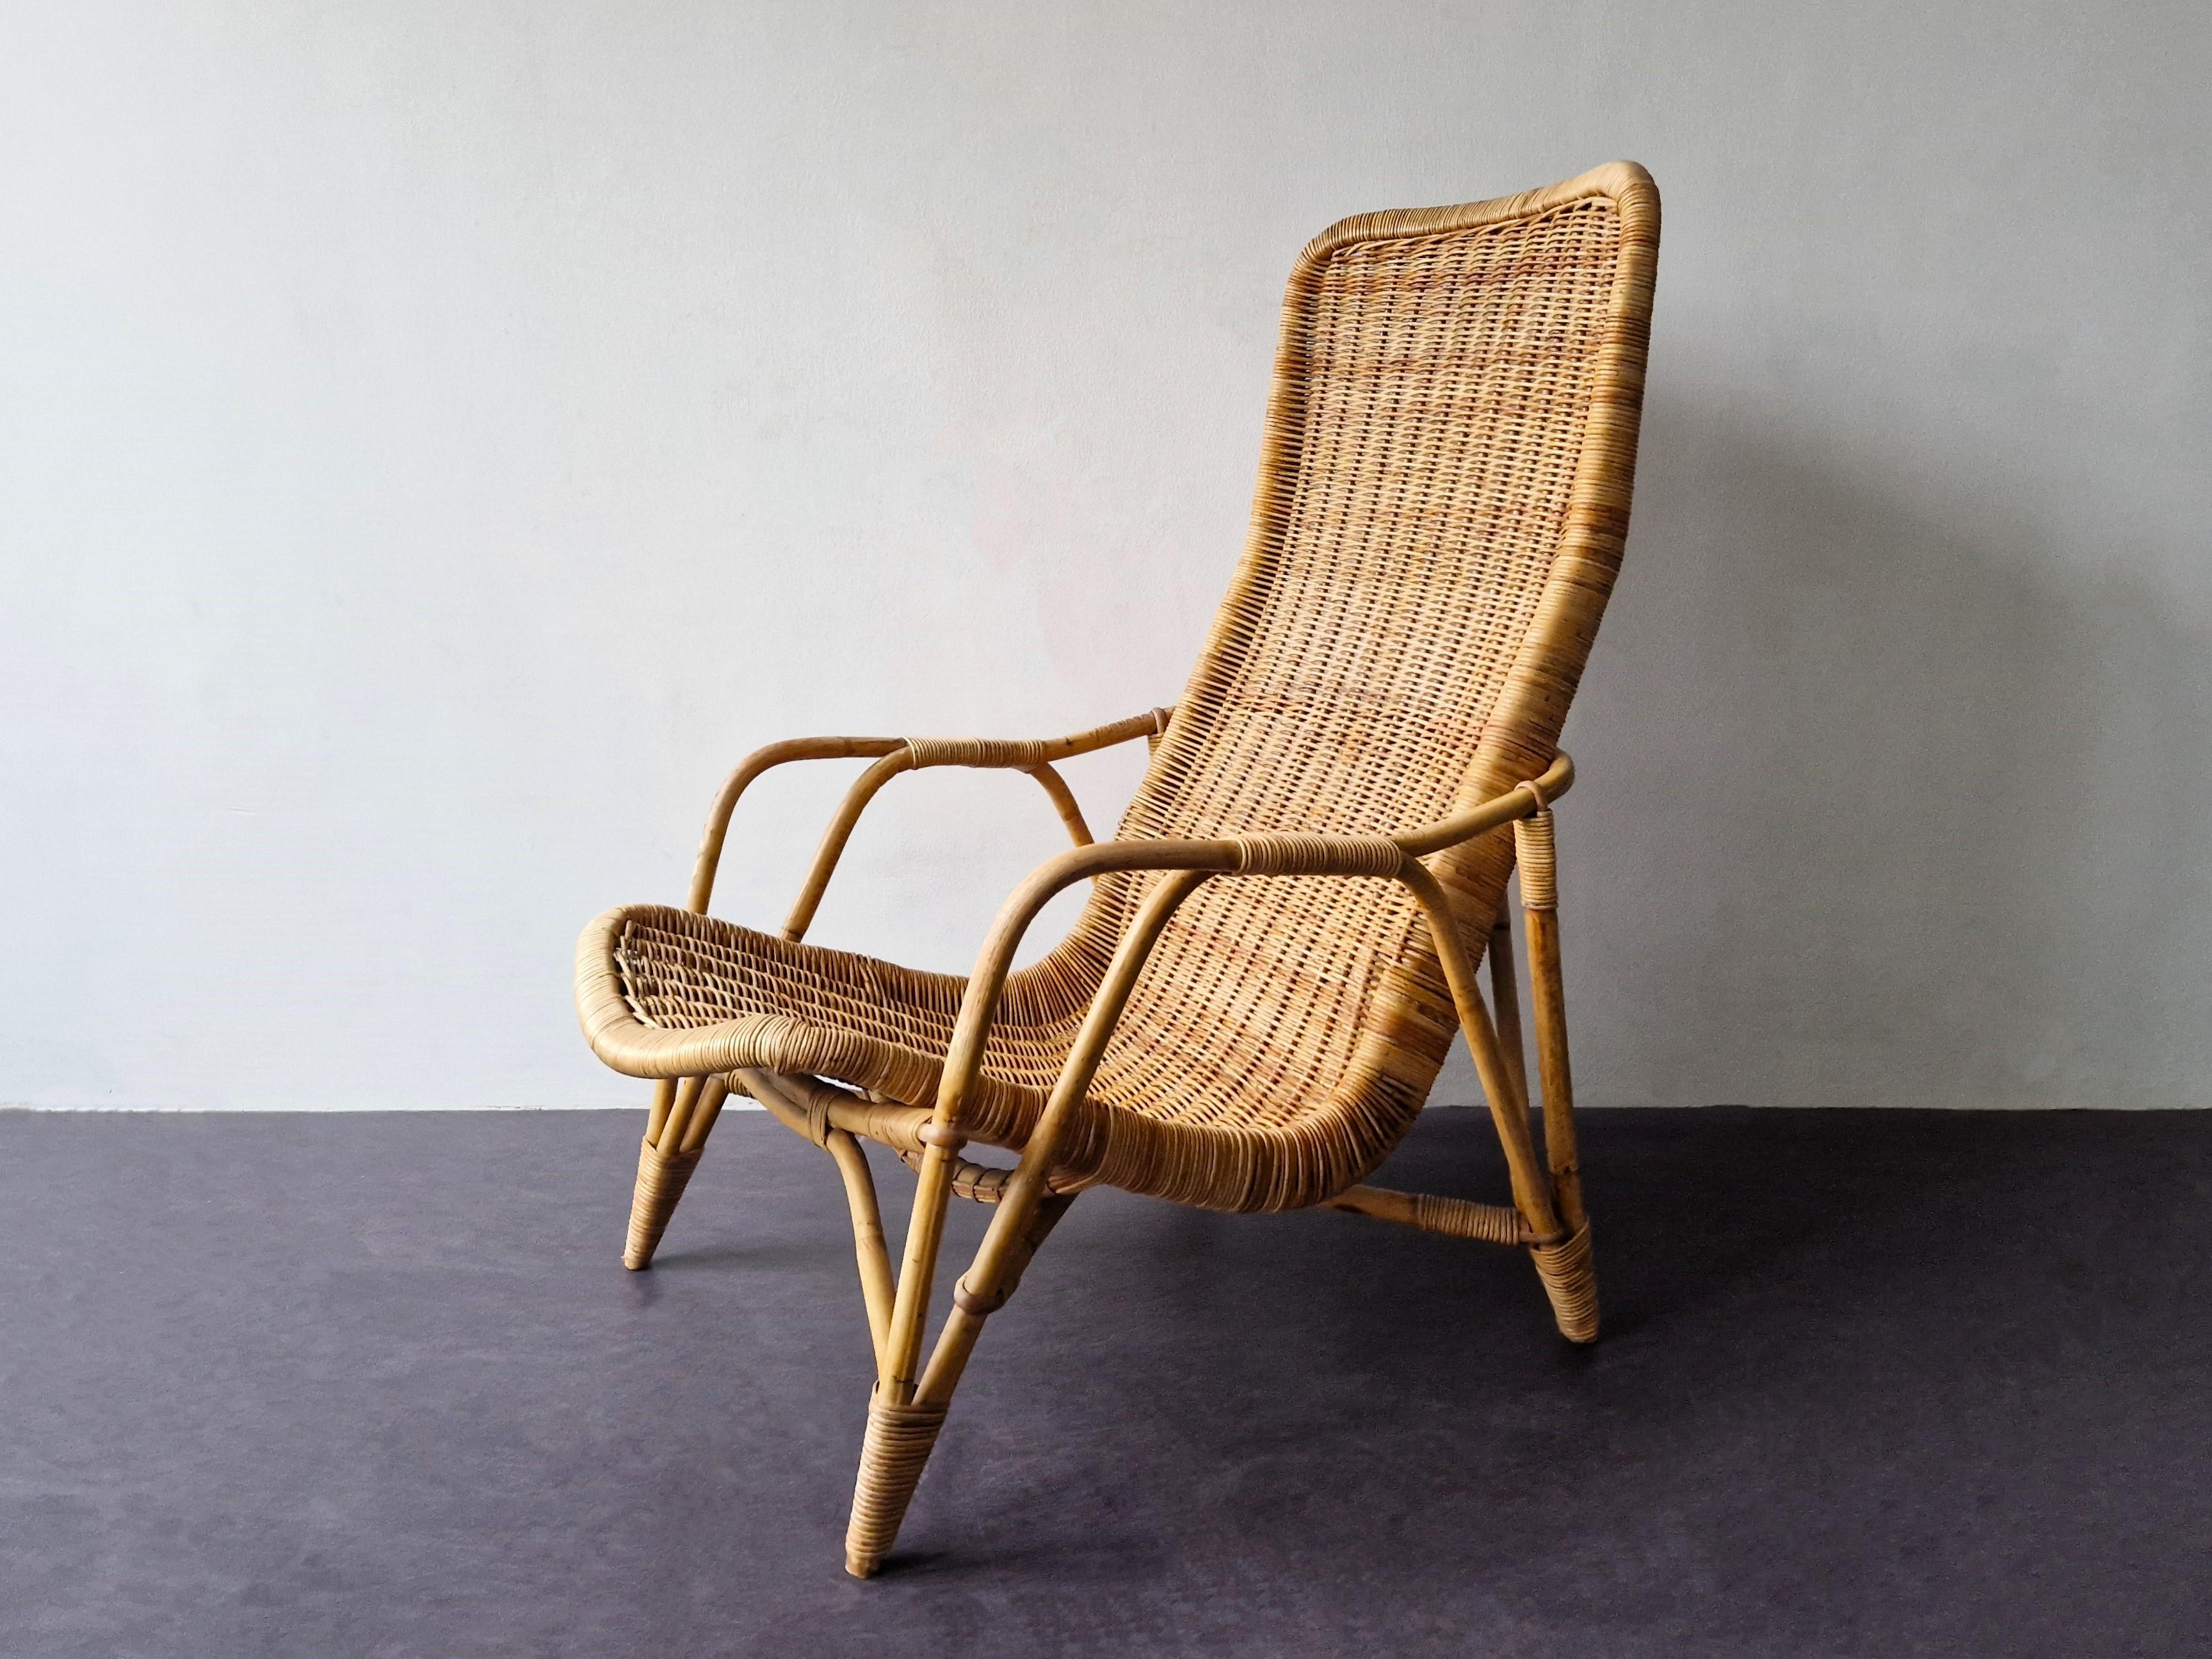 This beautiful adjustable rattan lounge chair, model 516a, was designed by Dirk van Sliedregt for Gebr. Jonkers Noordwolde in about 1952. This chair is the rattan version of model '514a' which does have a metal frame. The chair has the original